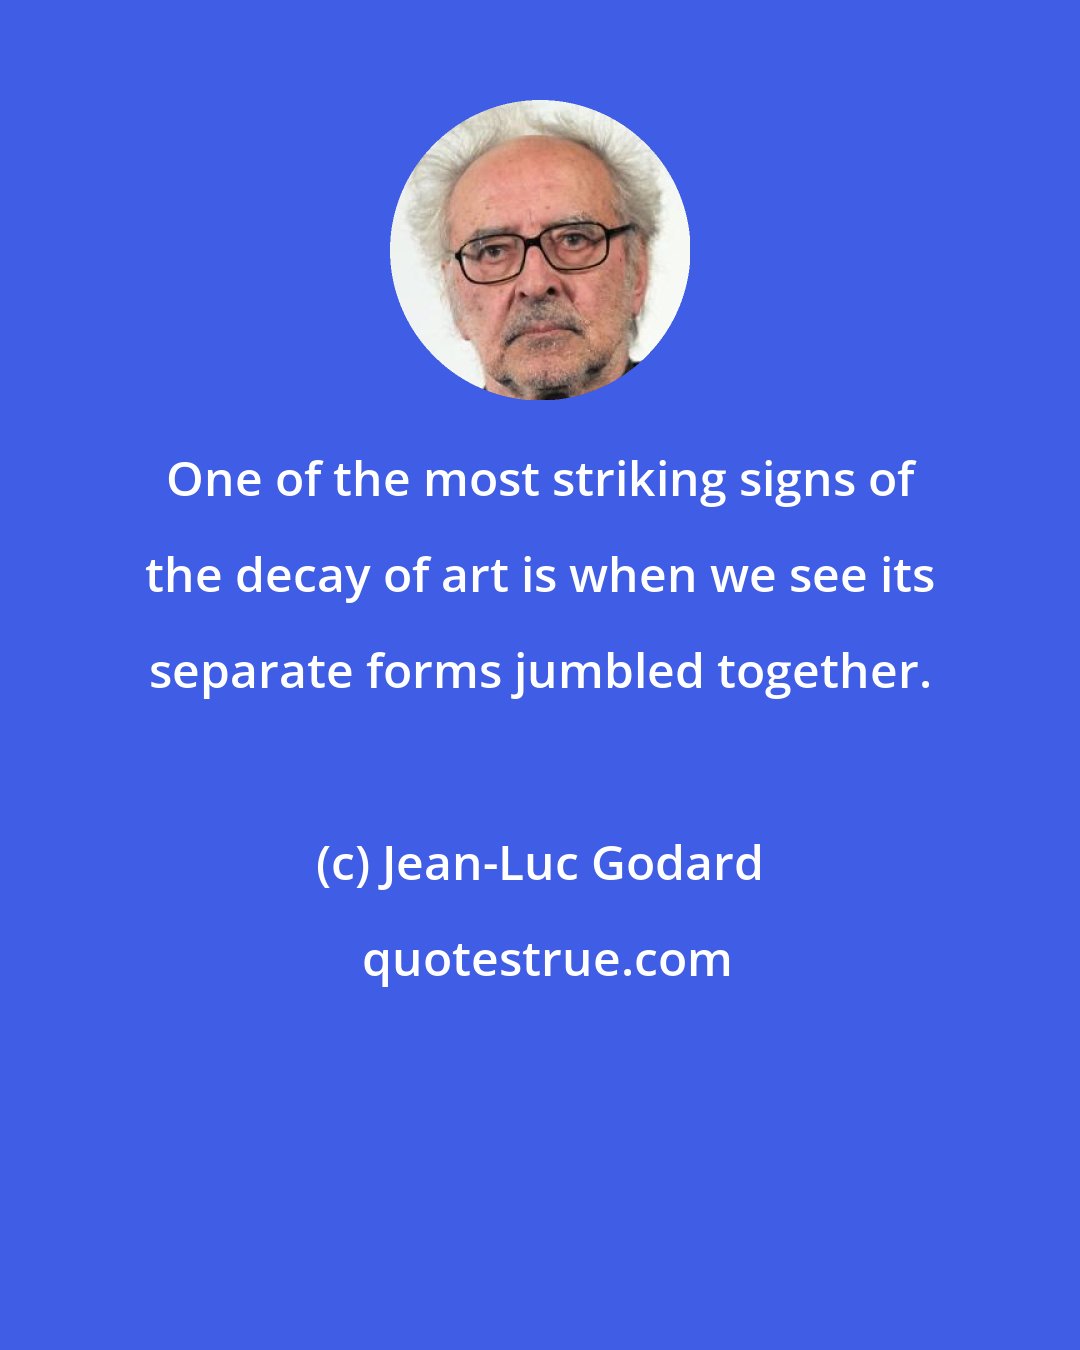 Jean-Luc Godard: One of the most striking signs of the decay of art is when we see its separate forms jumbled together.